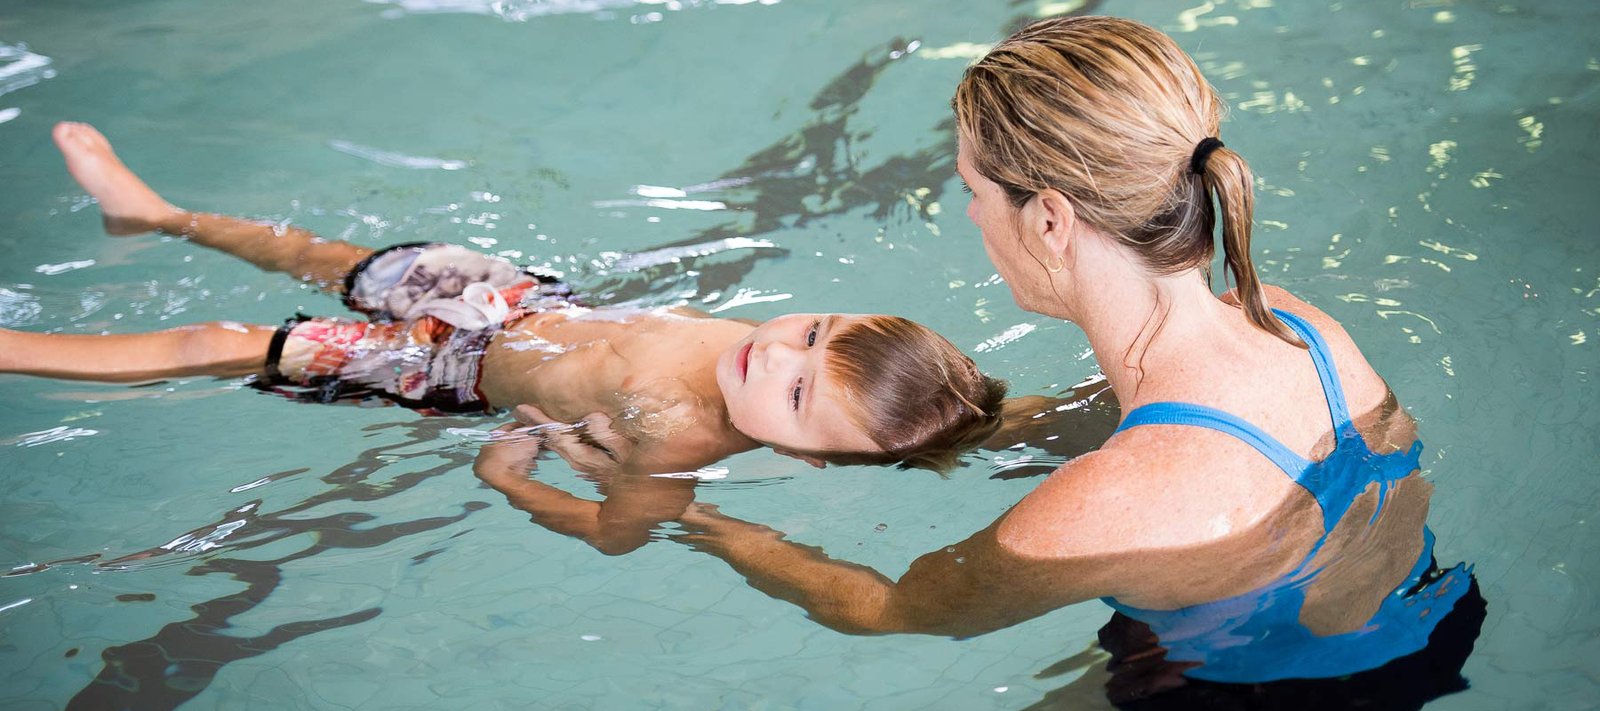 The Gentle Swim School

We pride ourselves on our gentle approach to Learn To Swim. We get results and tailor our approach to your child


						
							
							
						View All Services